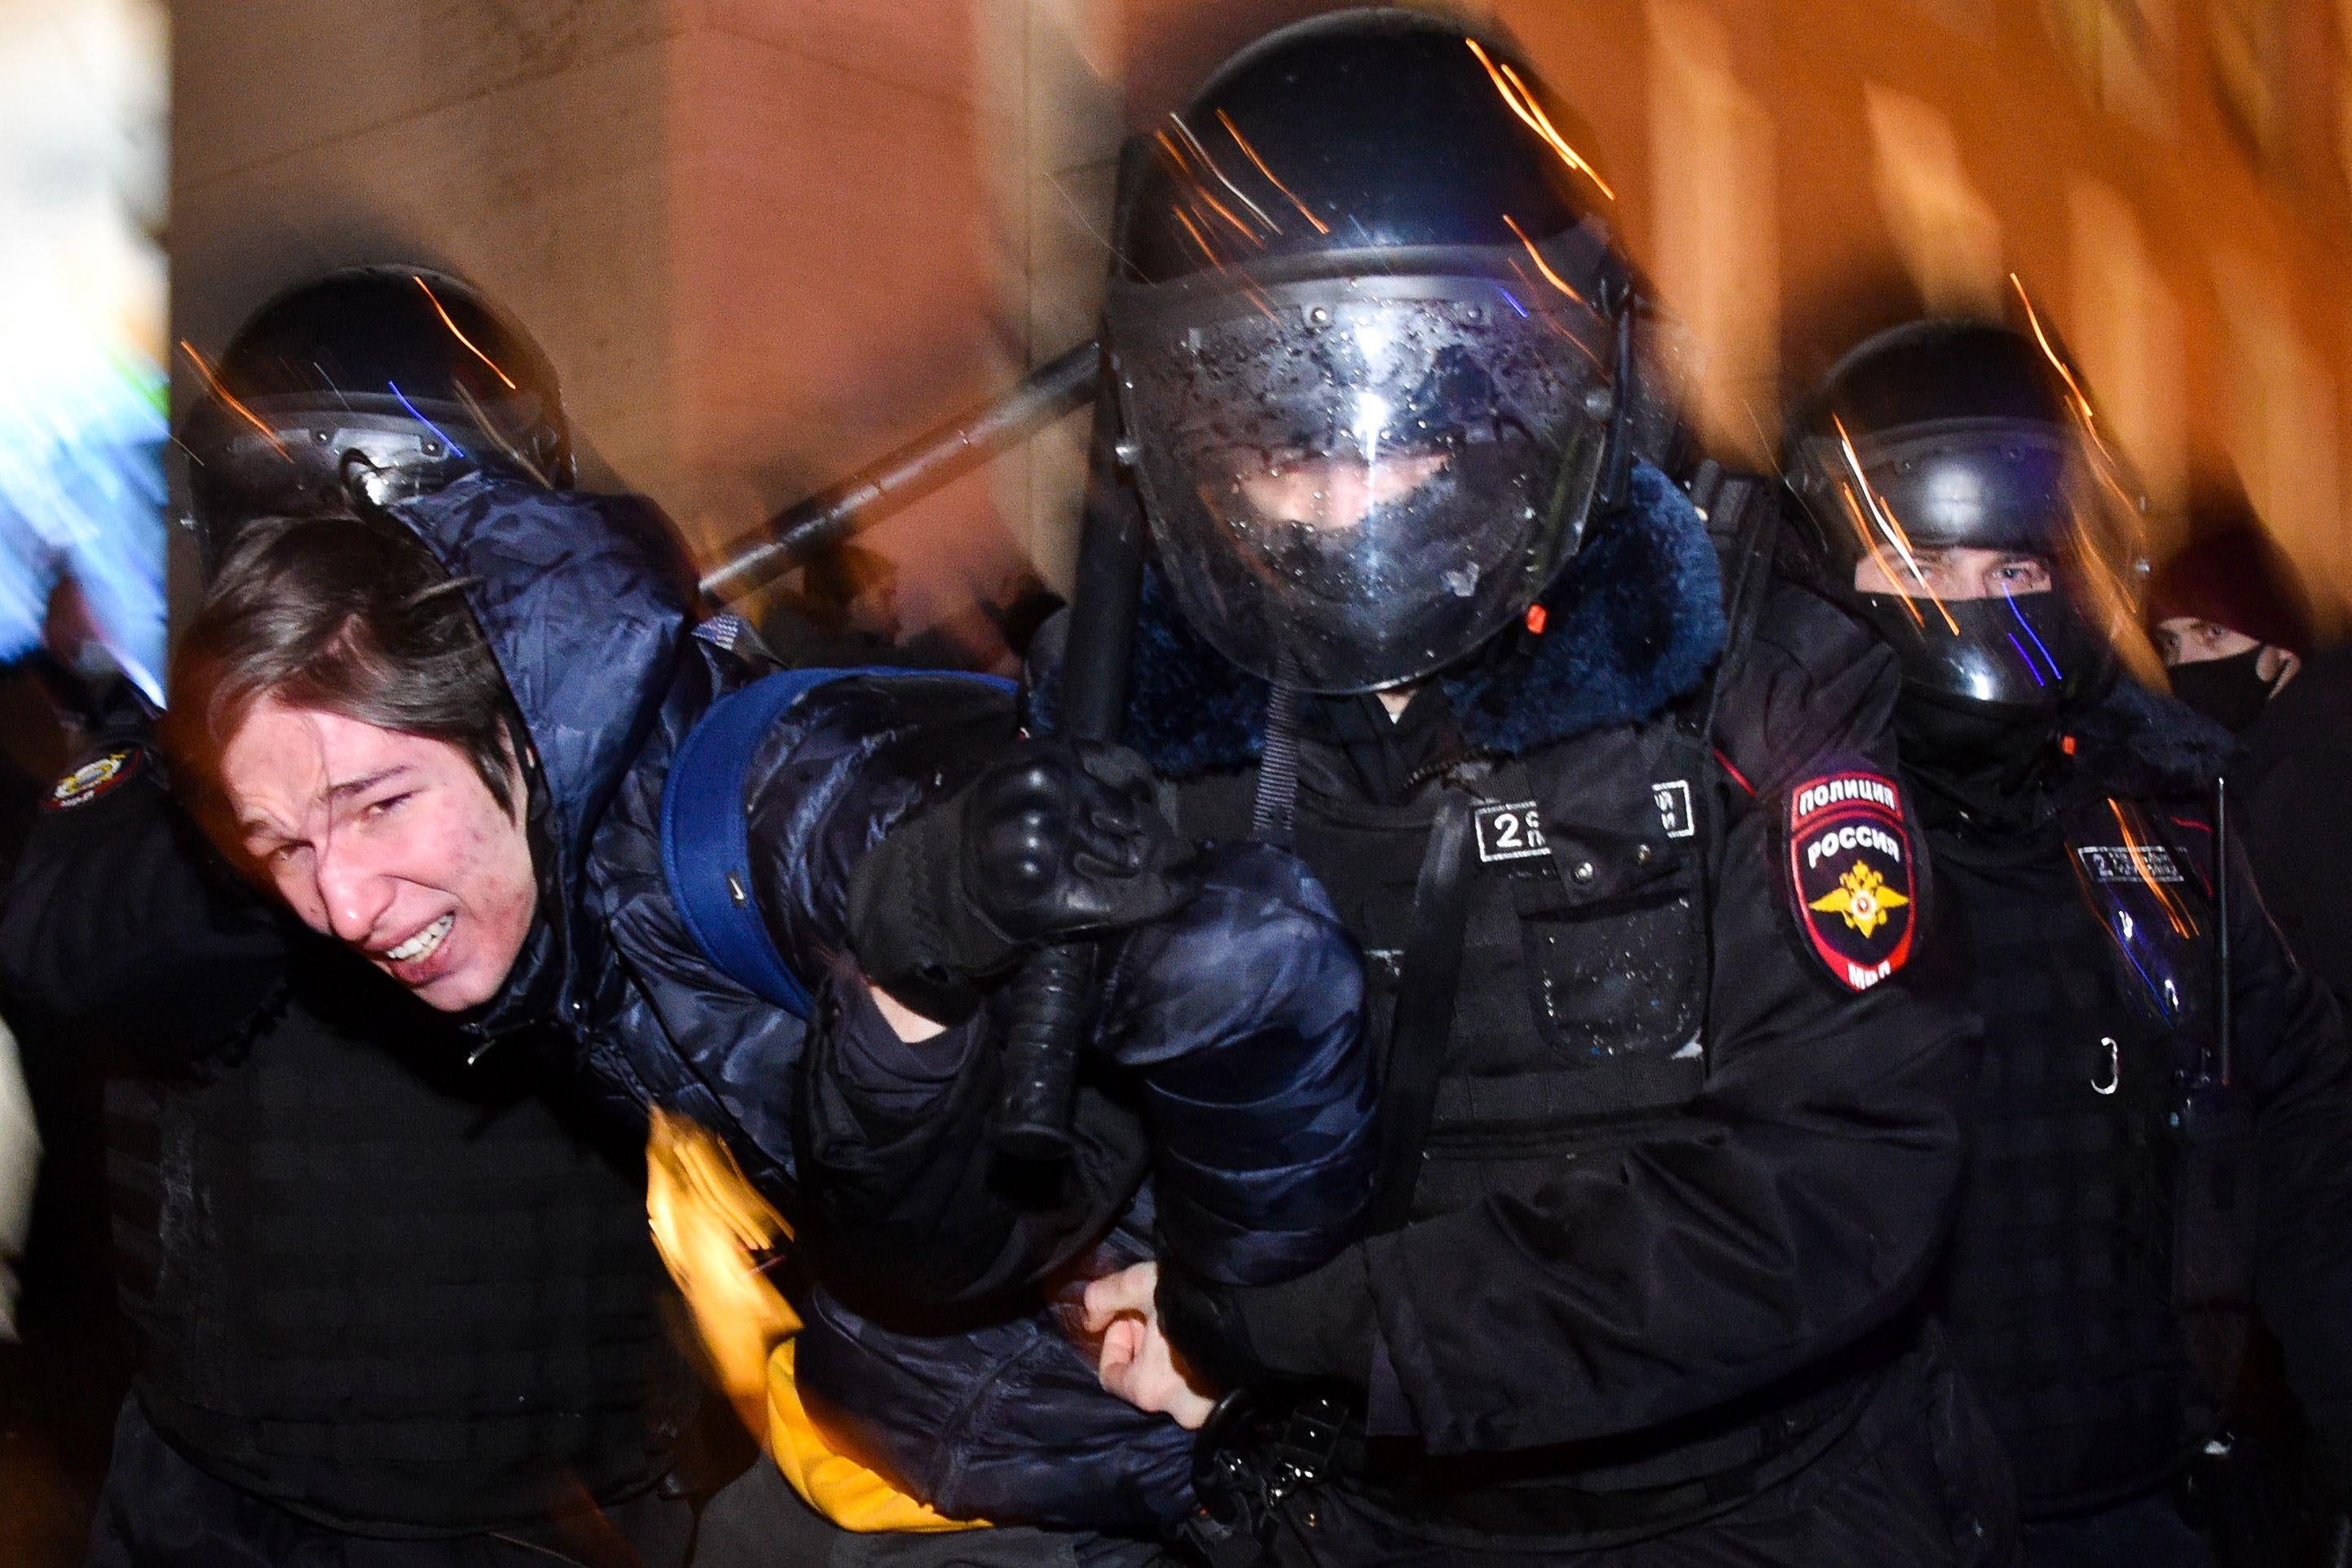 Riot police detain a protester during a rally in support of jailed opposition leader Alexei Navalny in downtown Moscow on January 23, 2021. 